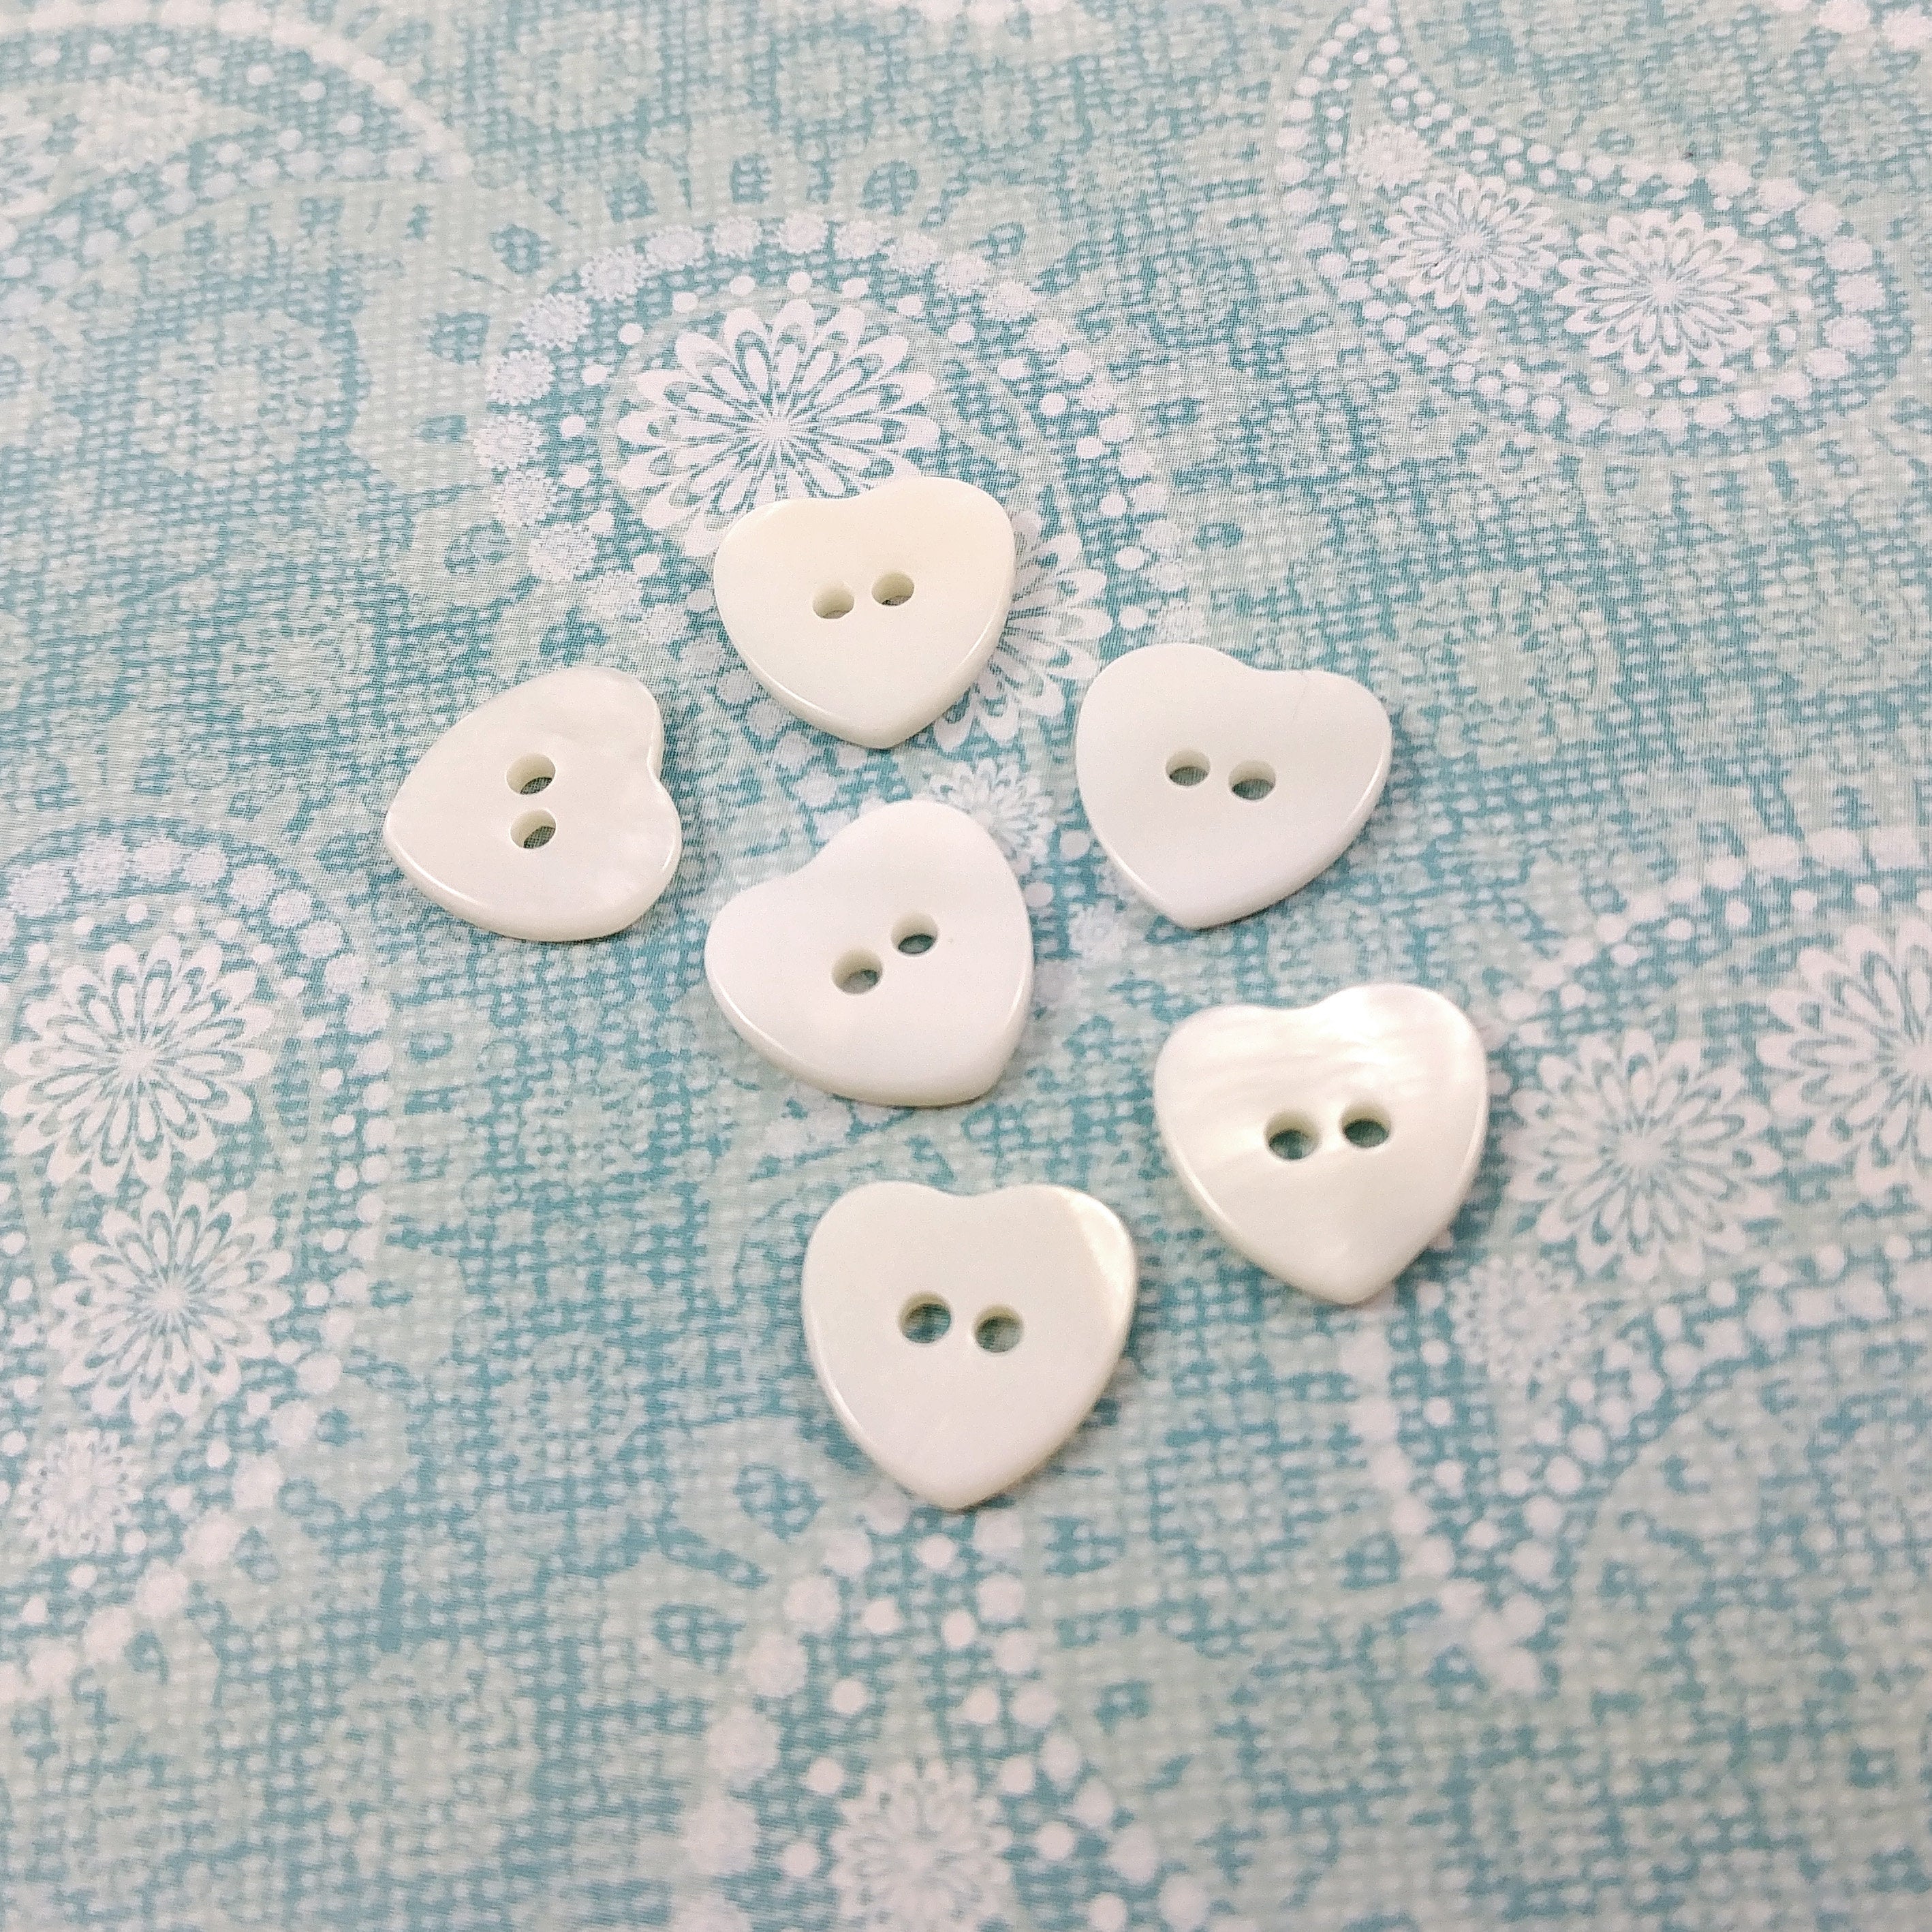 6 White heart buttons - Mother of Pearl Shell Buttons 12mm